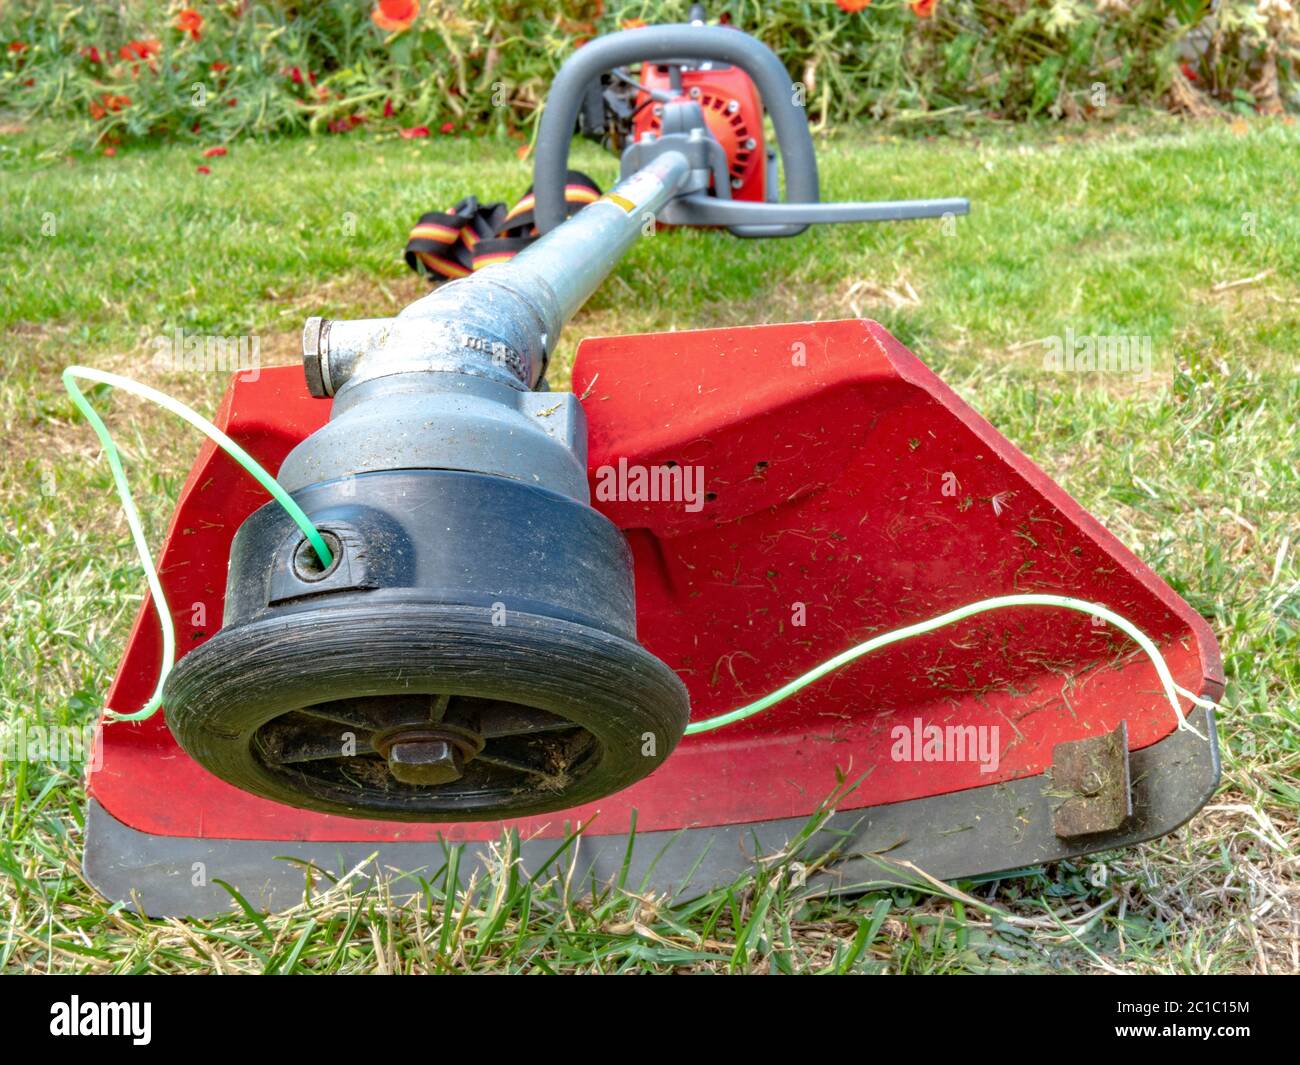 Closeup of the working end of a petrol engine garden strimmer / brush cutter, with exposed nylon line and safety guard, lying on a lawn. Stock Photo